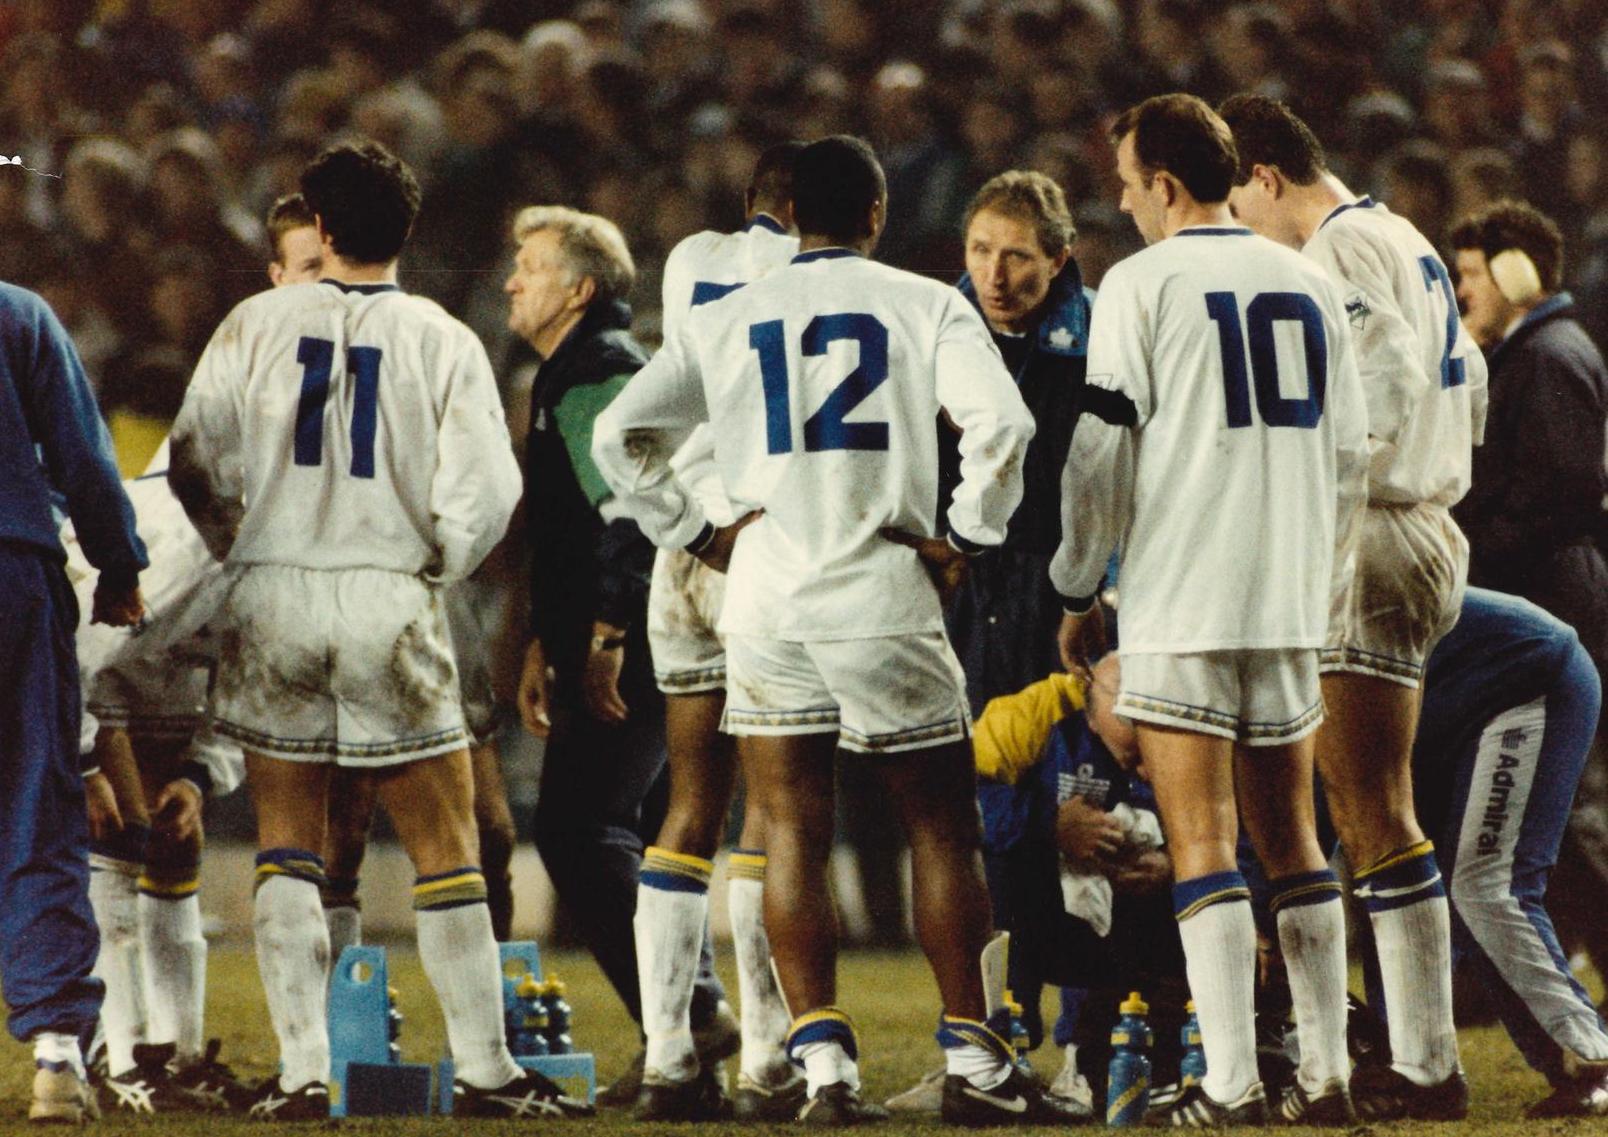 Words of wisdom - Sgt Wilko tries to inspire his mean after the FA Cup fourth round tie went to extra time. Ian Wright broke the hearts of Leeds fans that night.